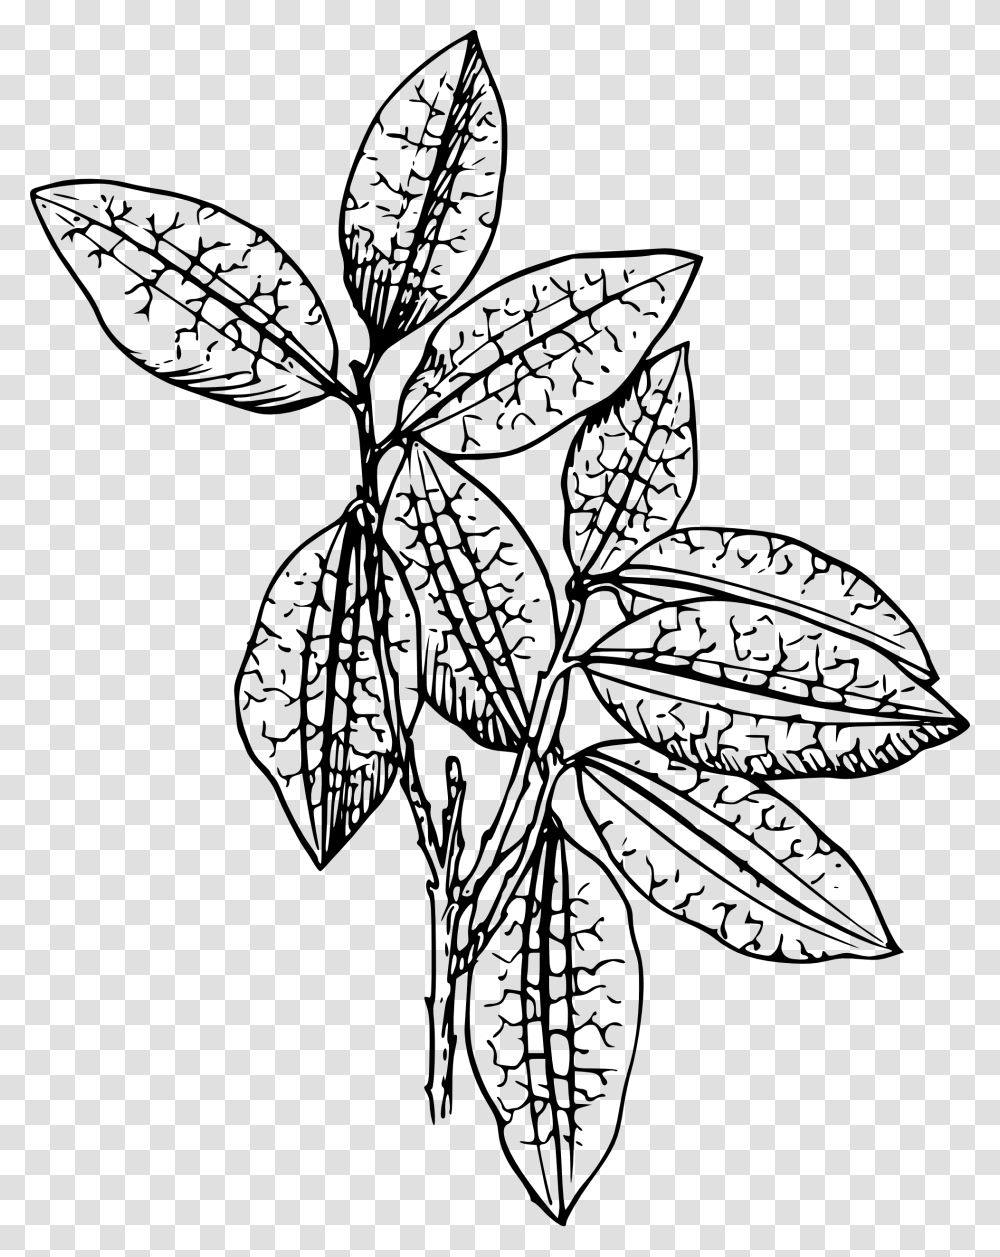 Parts Of Tomato Plant Clipart Black And White Collection, Leaf, Drawing, Potted Plant, Vase Transparent Png